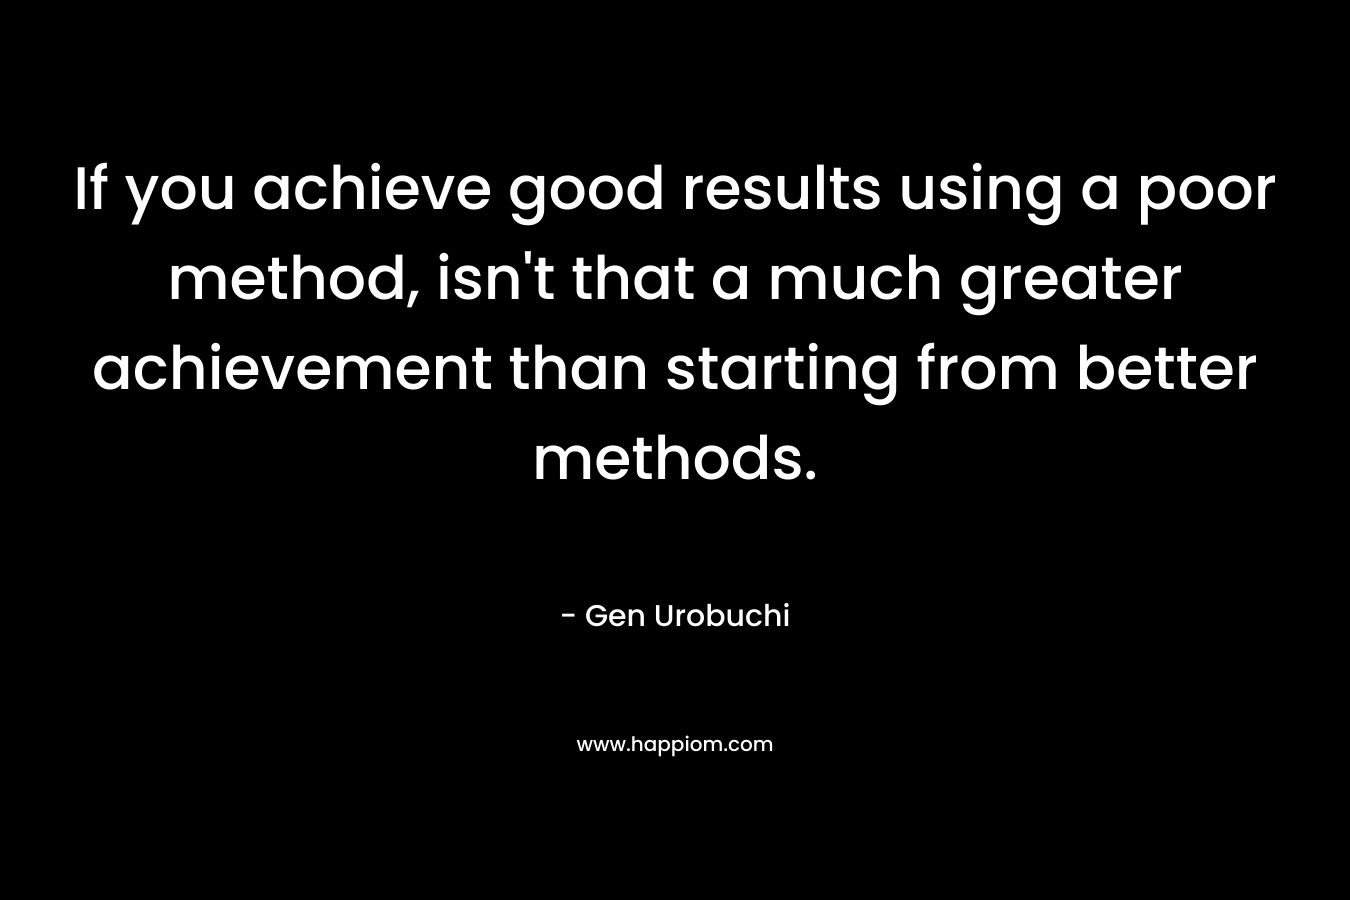 If you achieve good results using a poor method, isn’t that a much greater achievement than starting from better methods. – Gen Urobuchi